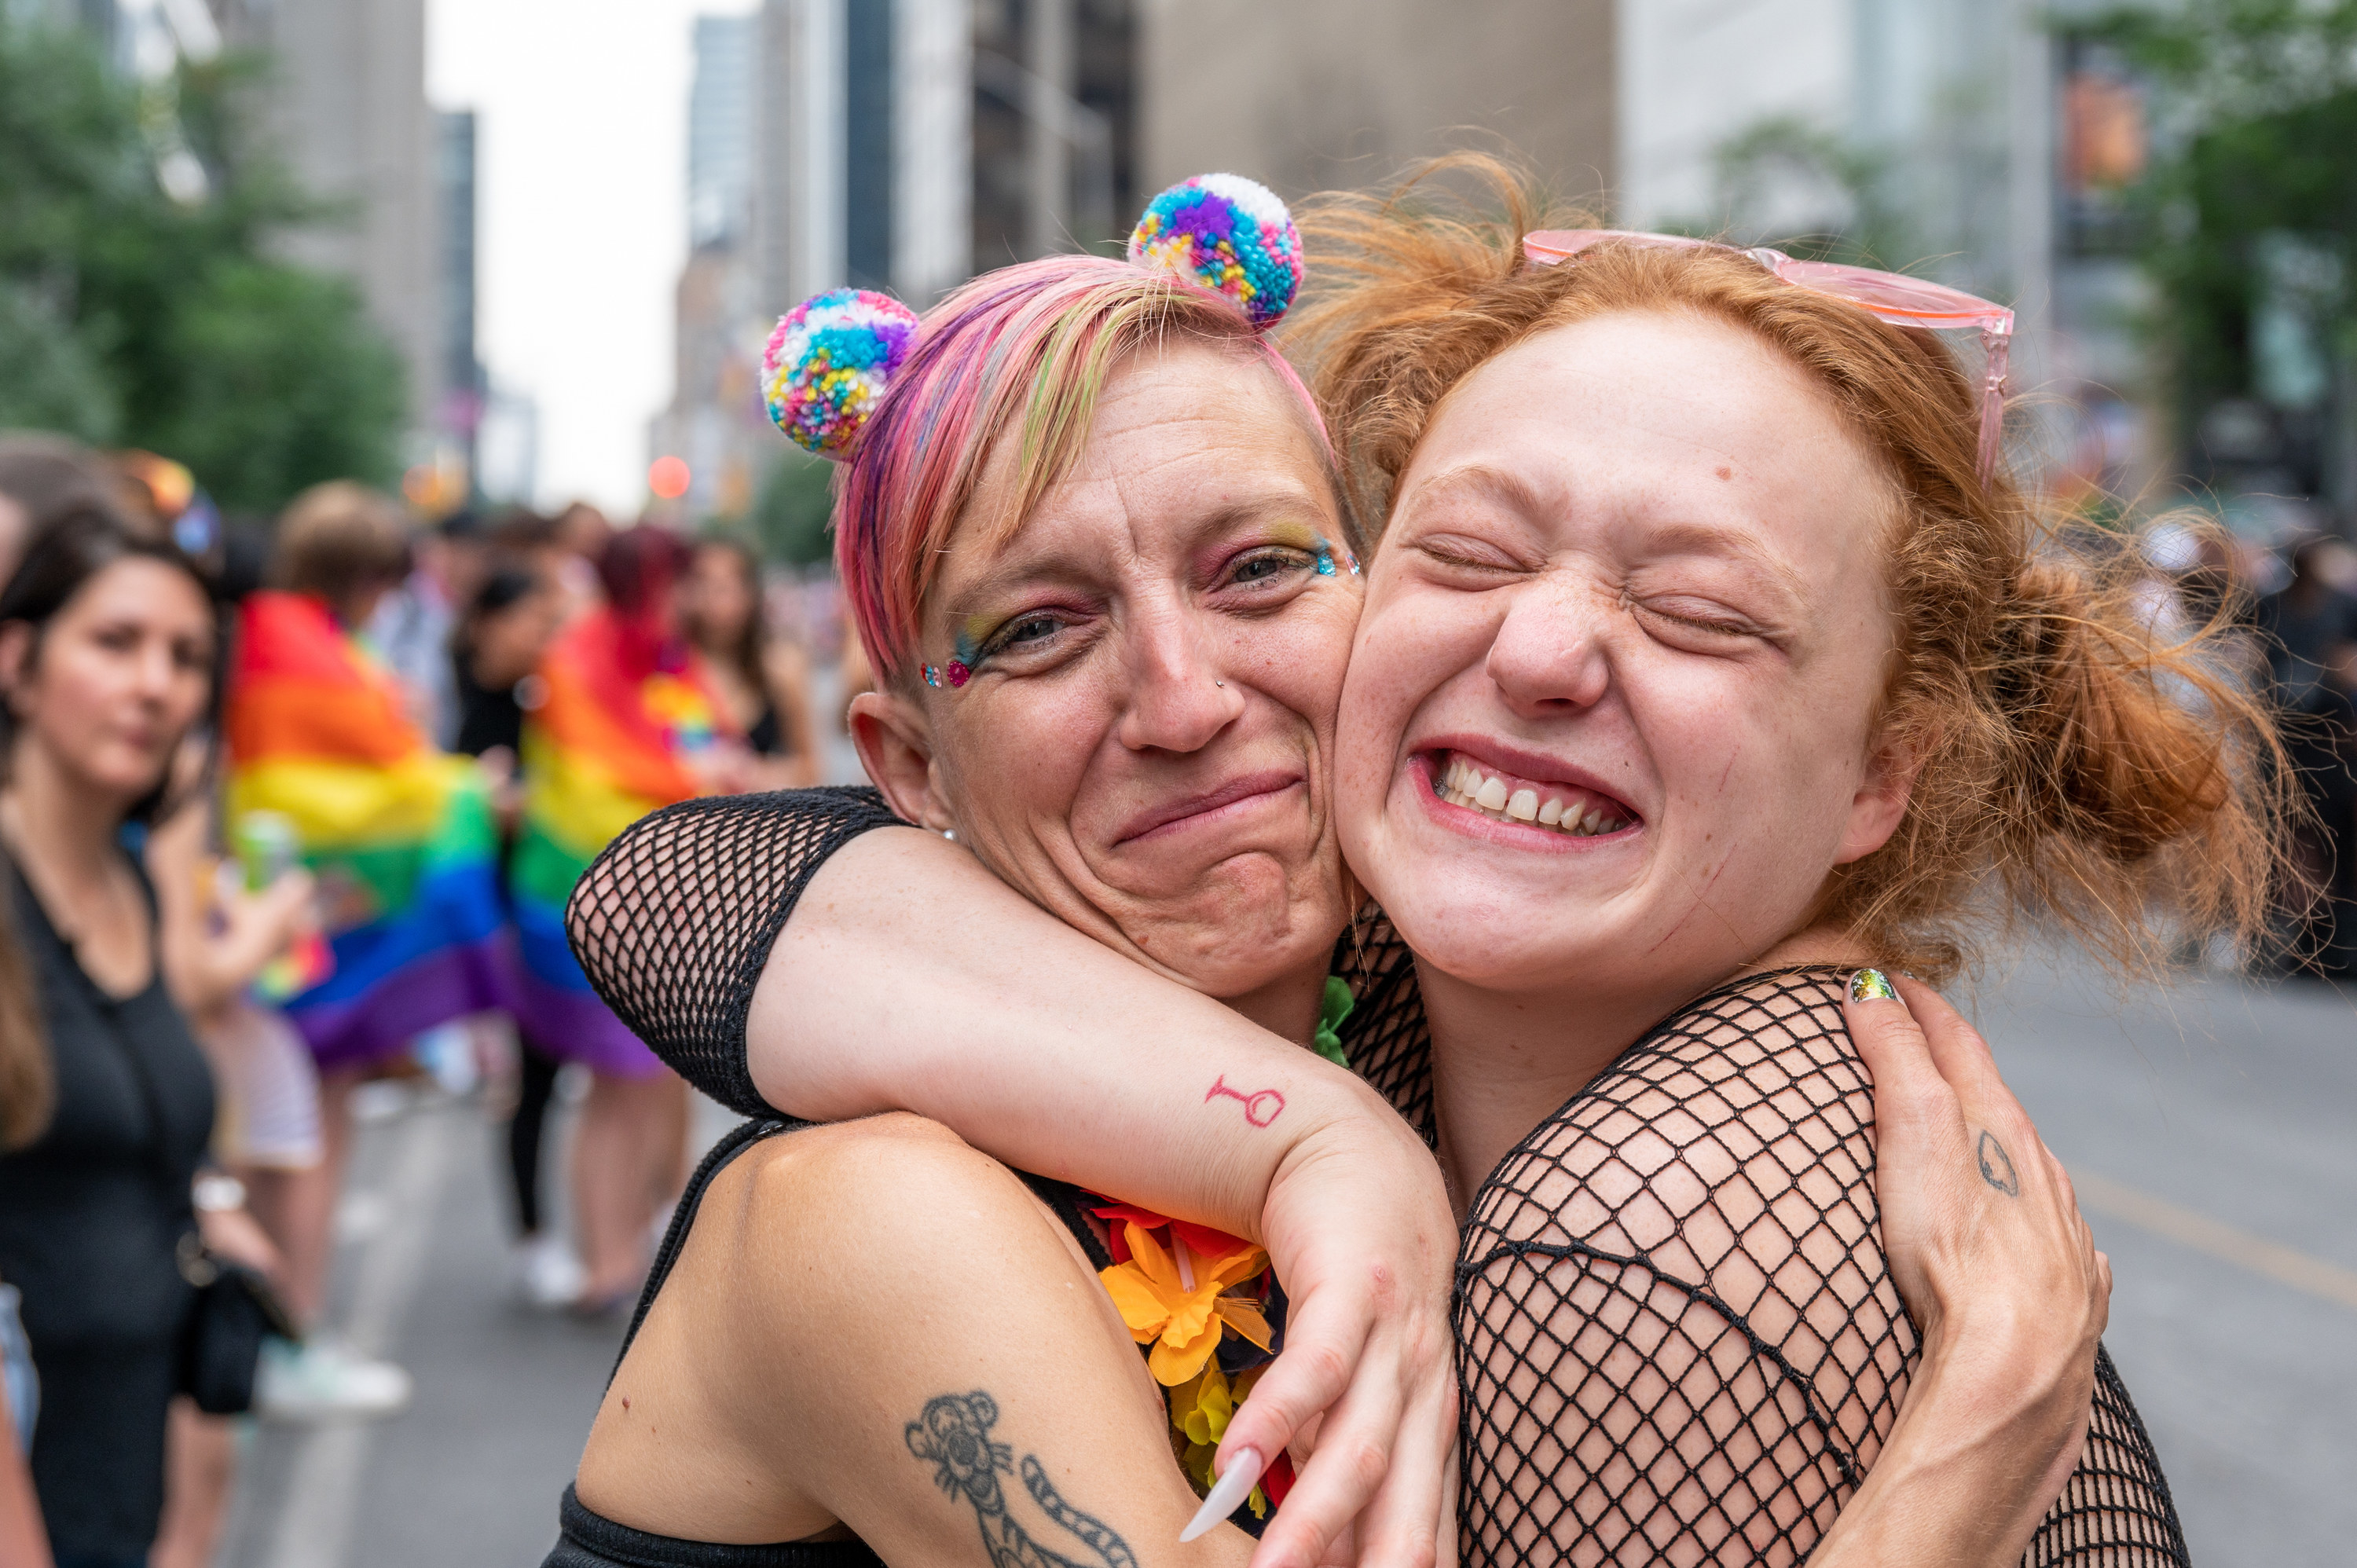 Two Toronto Pride attendees hug during the annual parade